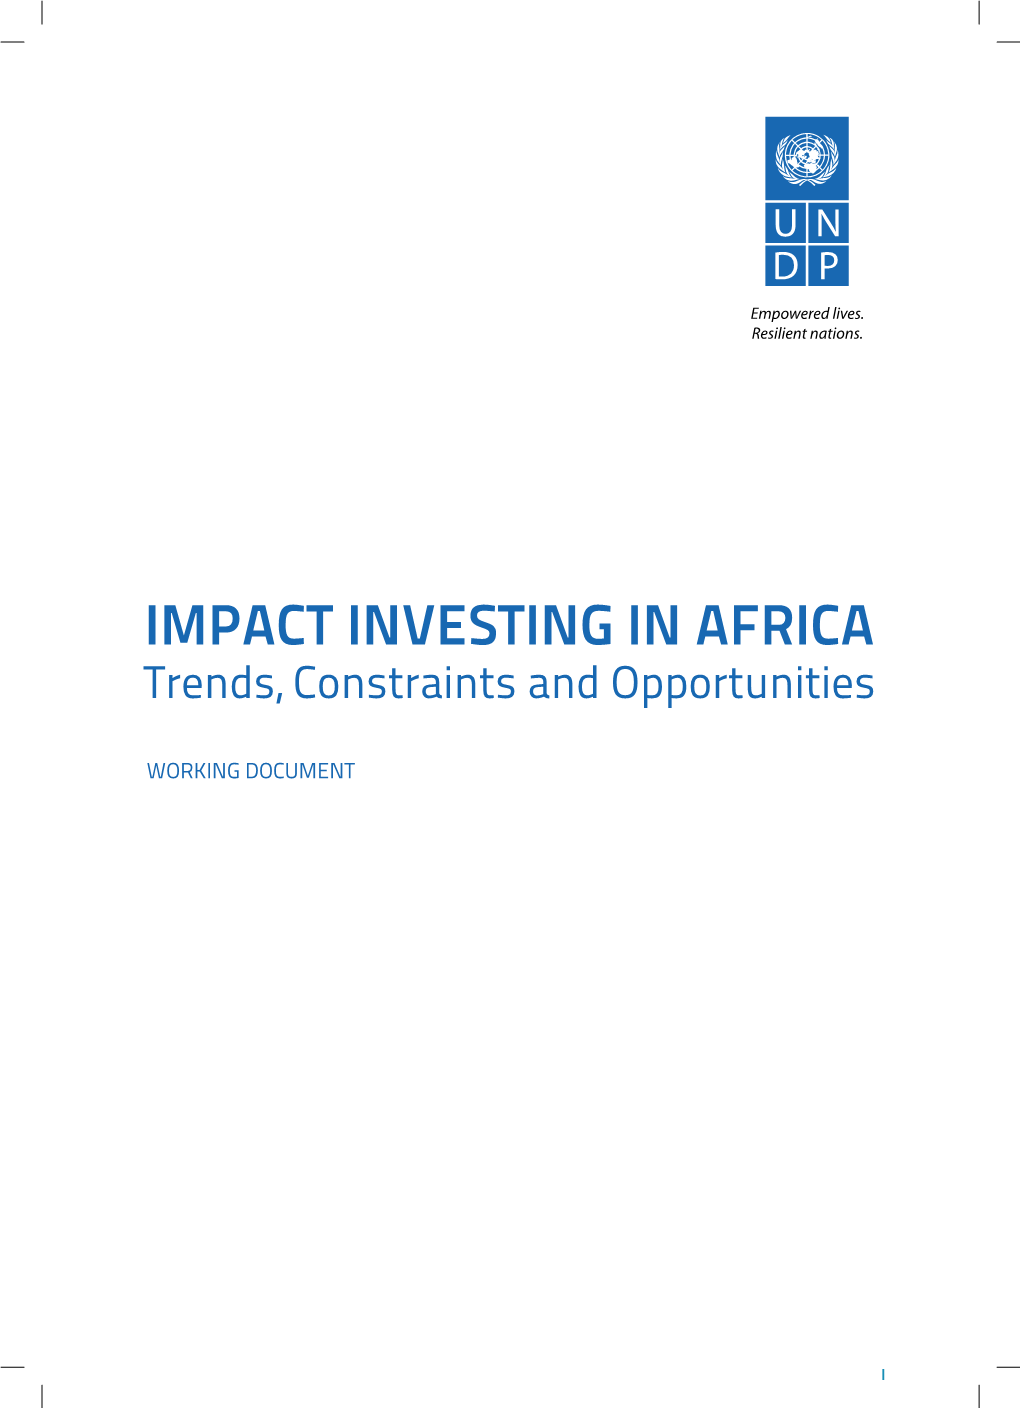 IMPACT INVESTING in AFRICA Trends, Constraints and Opportunities